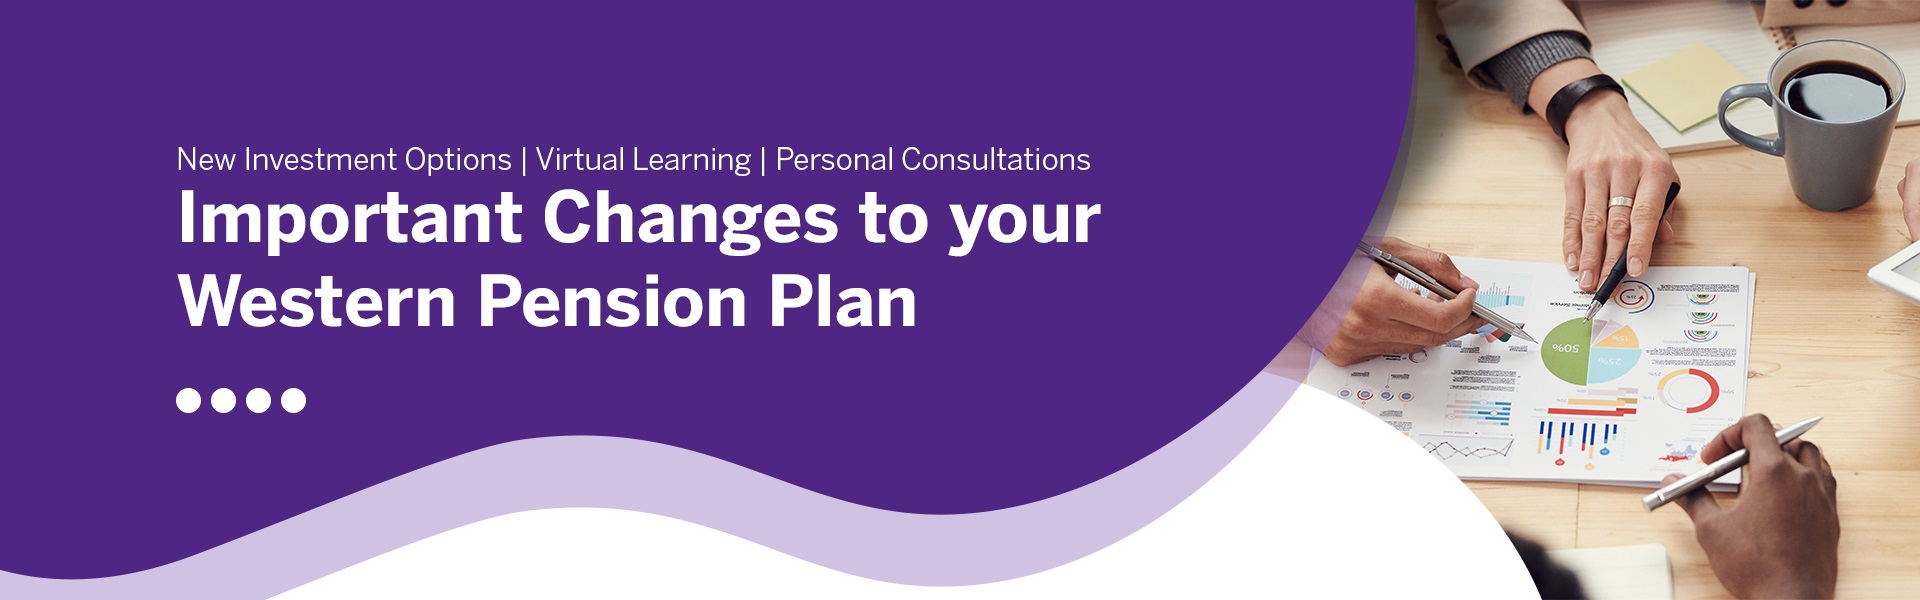 Important changes to your Western Pension Plan